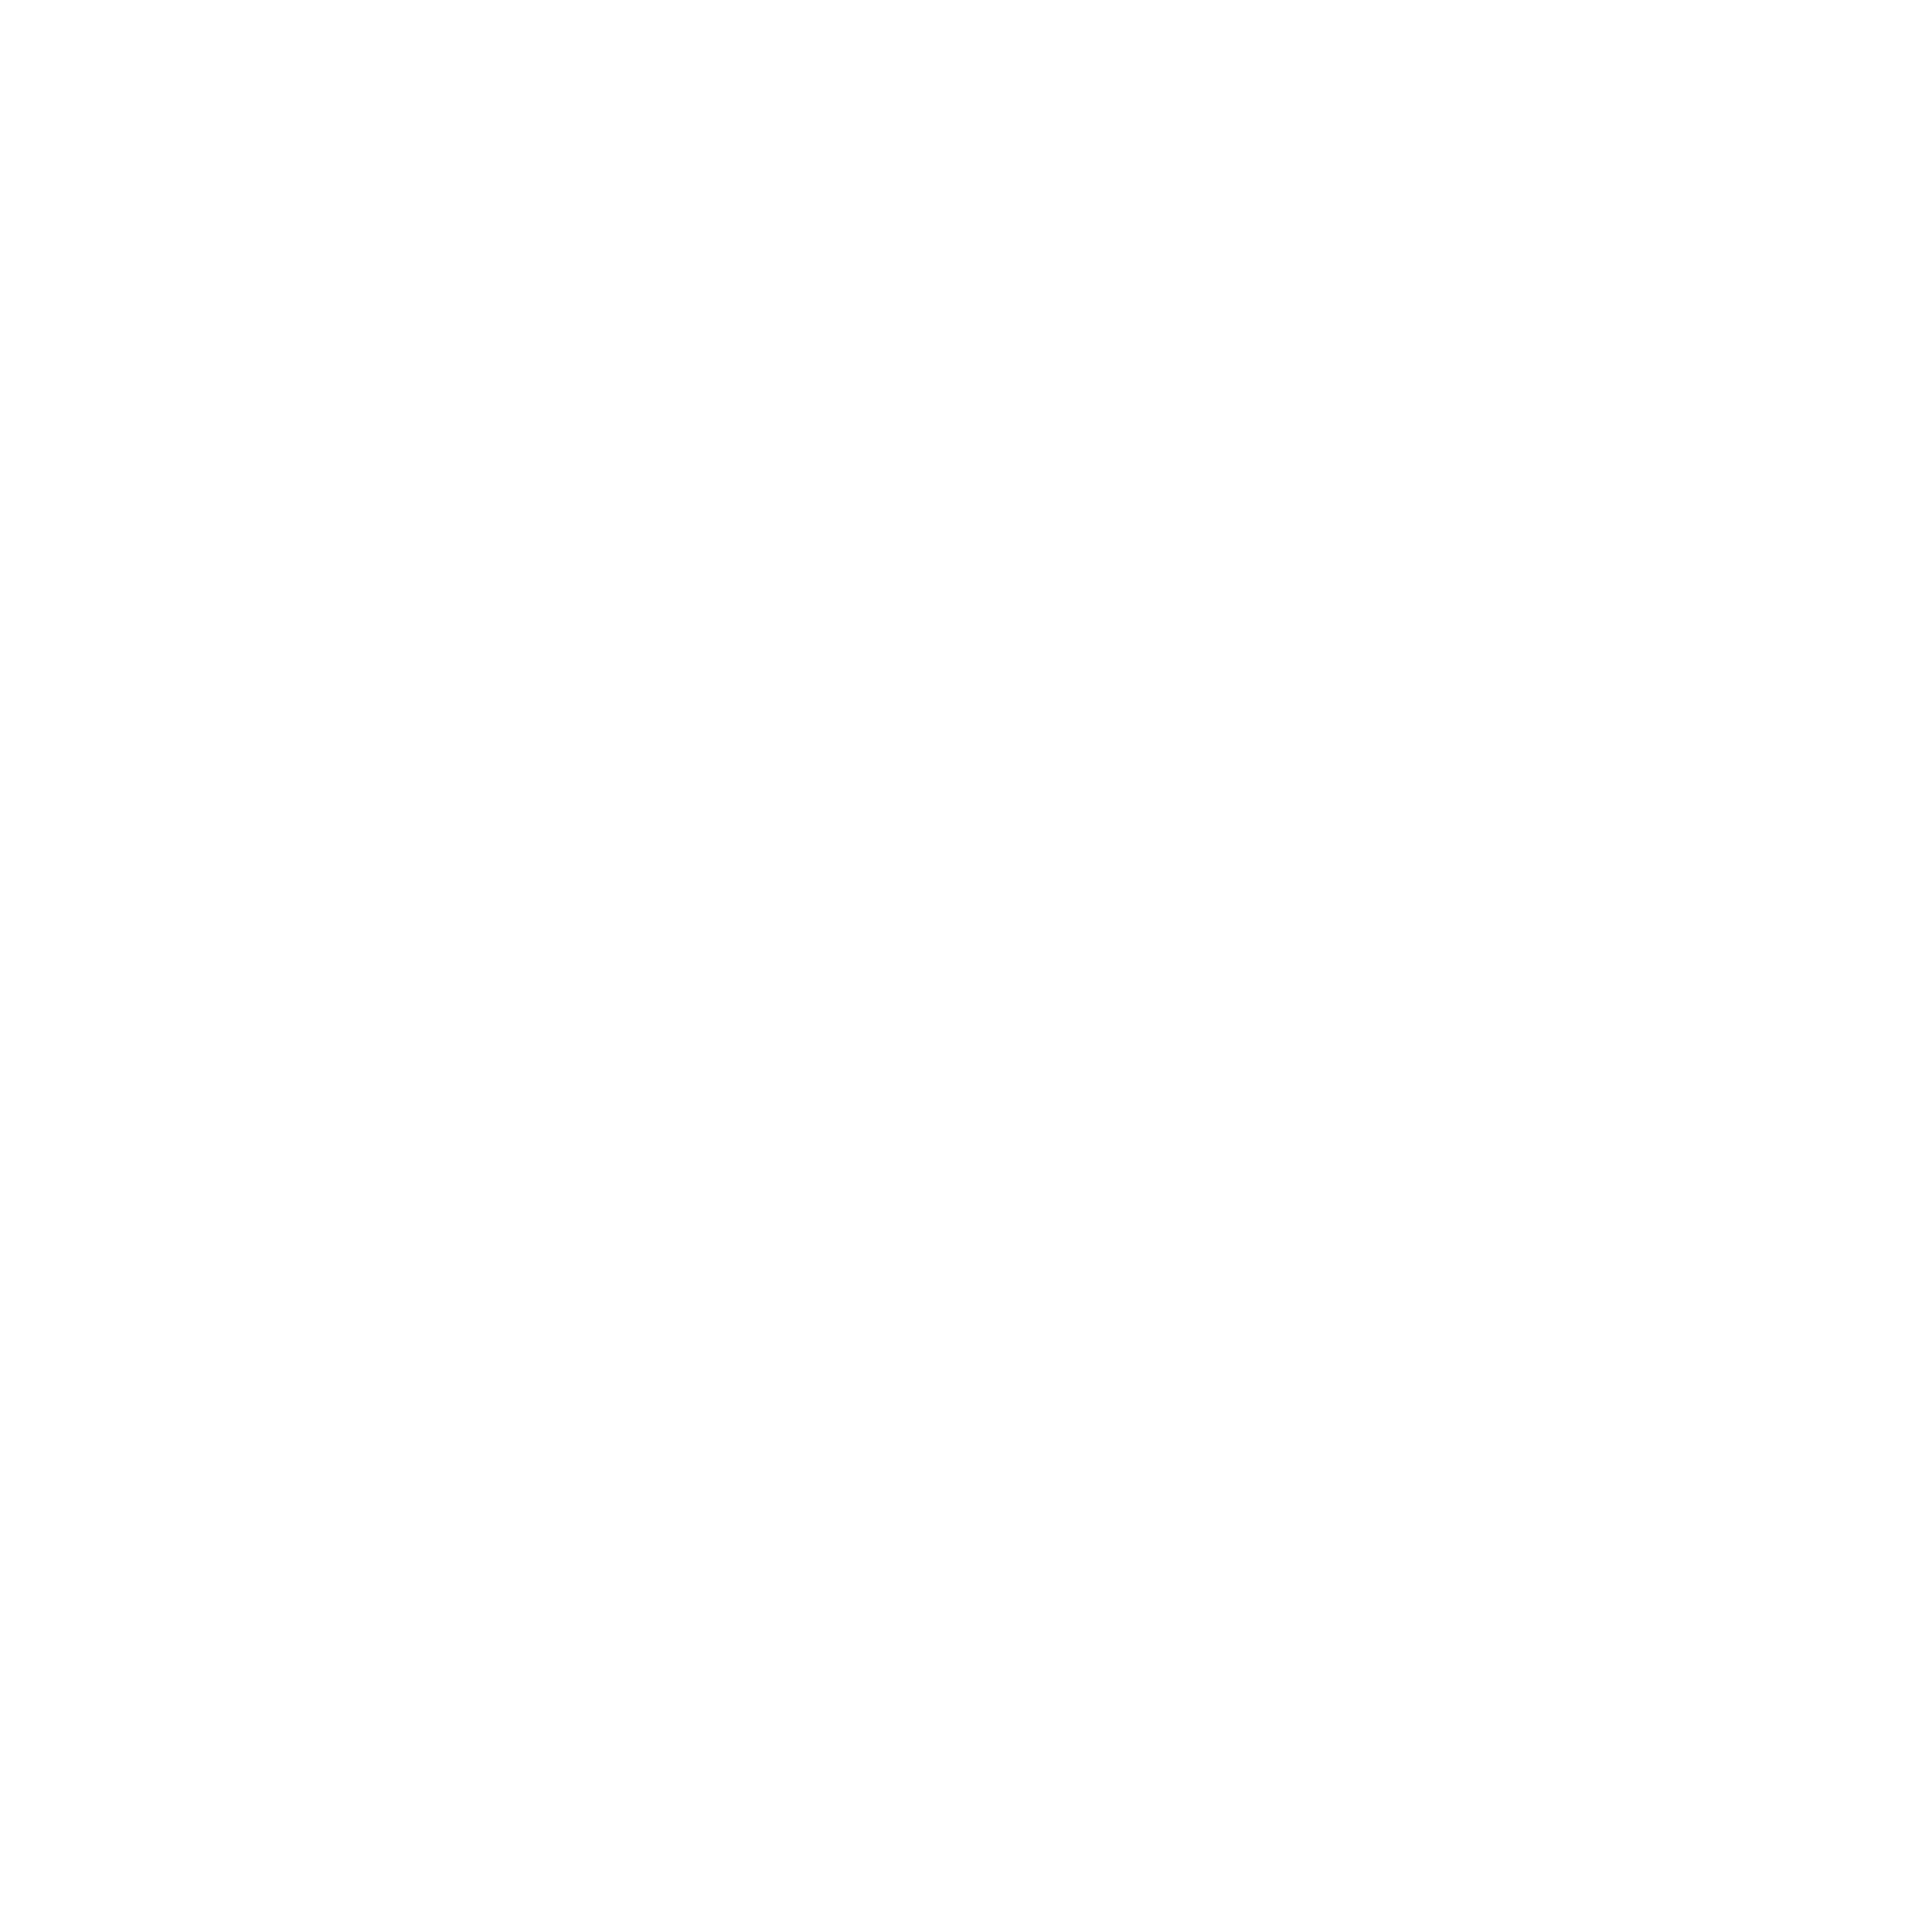 southern-living-logo-black-and-white.png